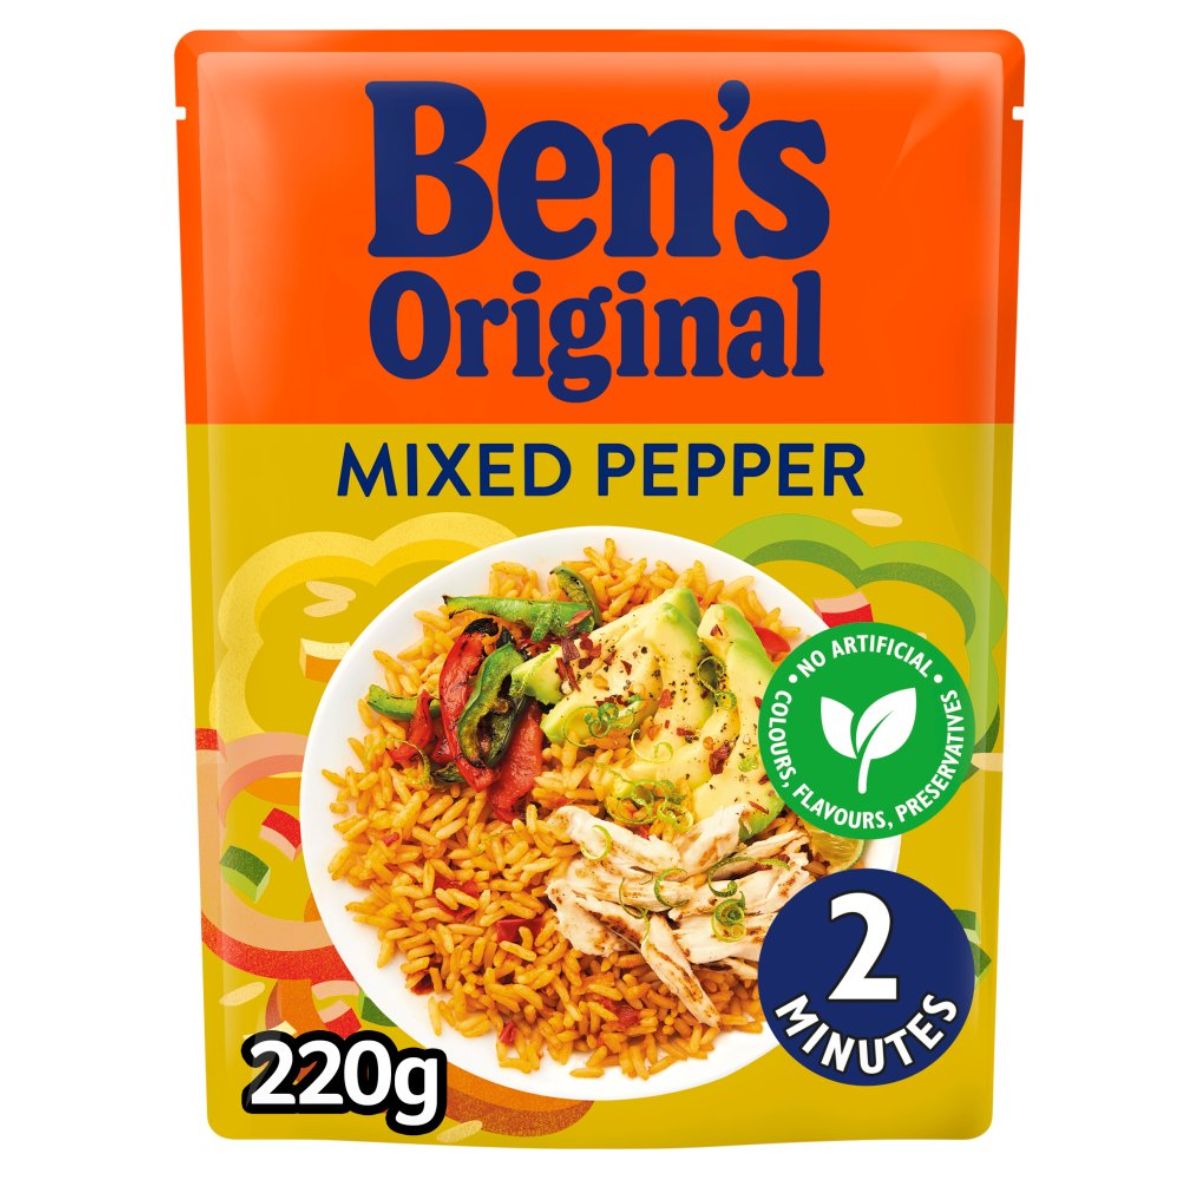 Package of Bens Original - Mixed Pepper Microwave Rice - 220g, ready in 2 minutes.